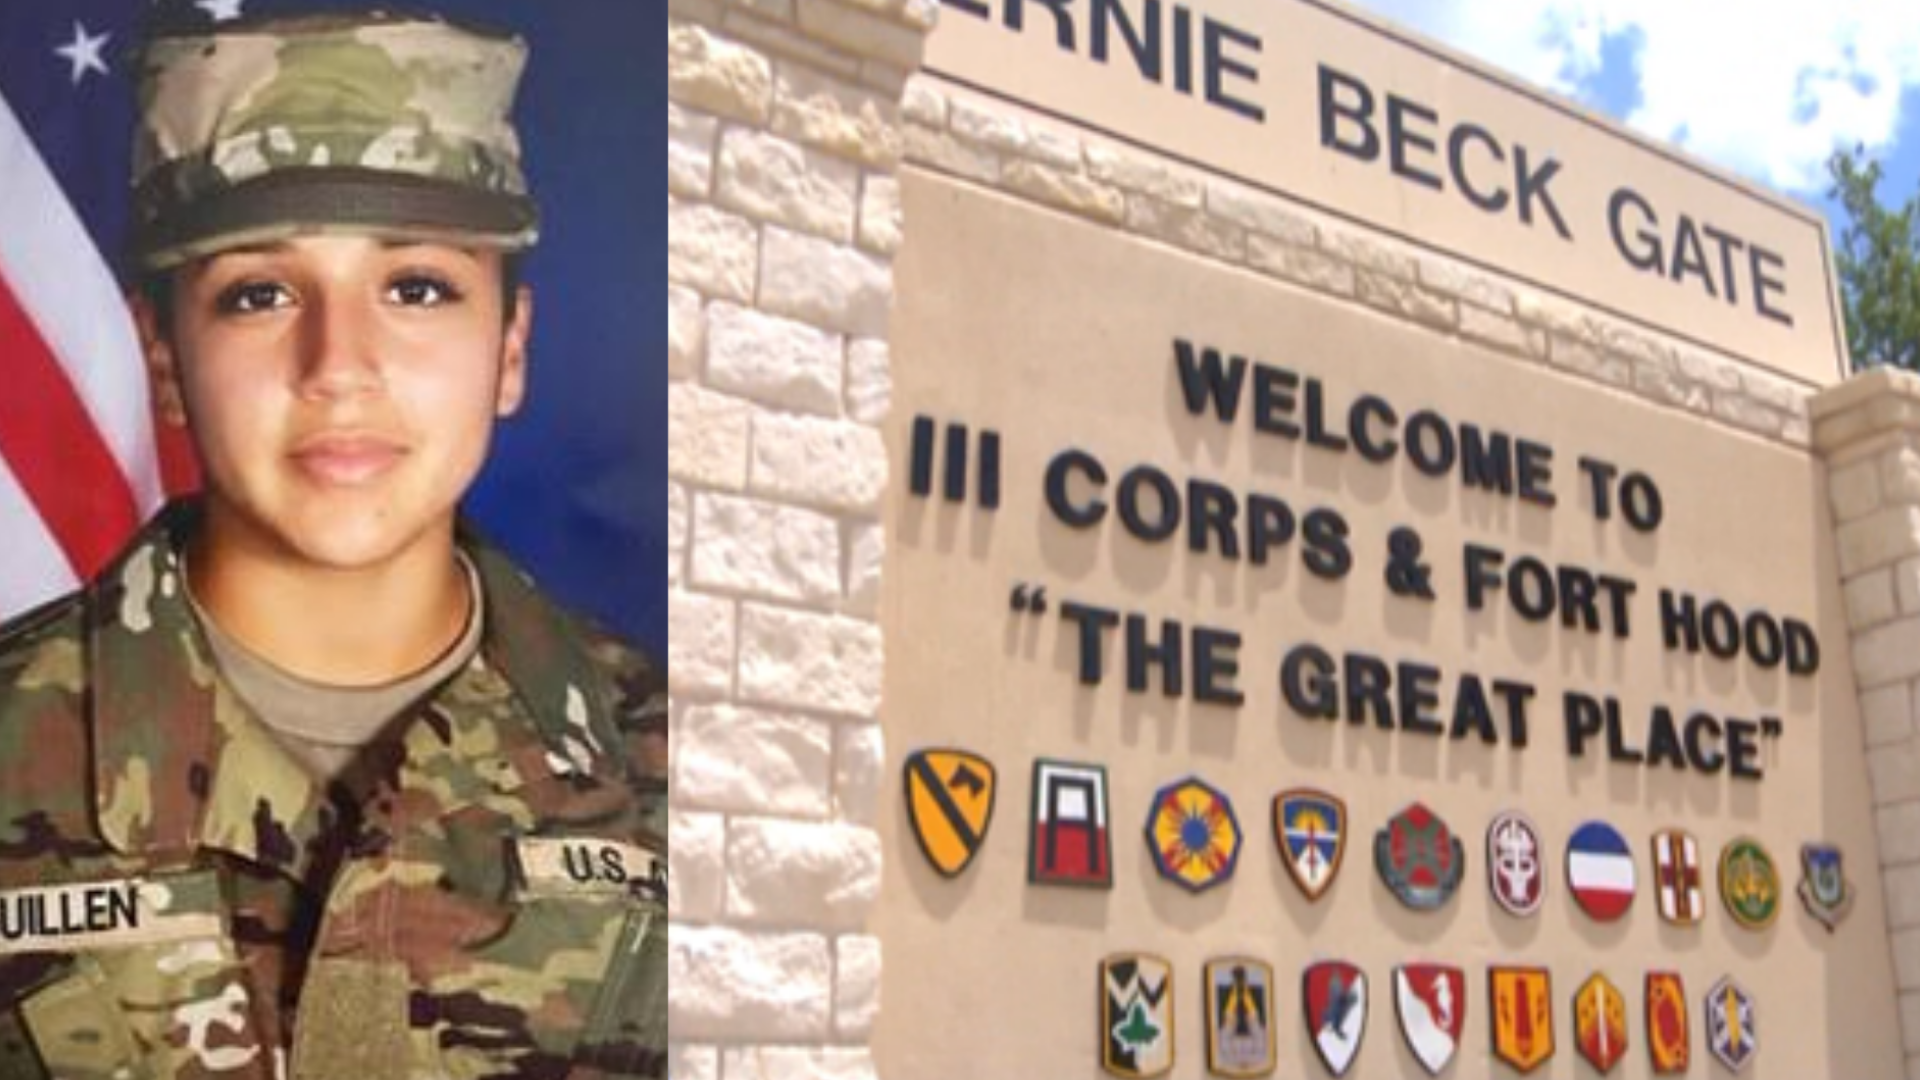 14 Fort Hood leaders were relieved of duty or suspended in response to an independent review committee's investigation launched after Vanessa Guillen's death.